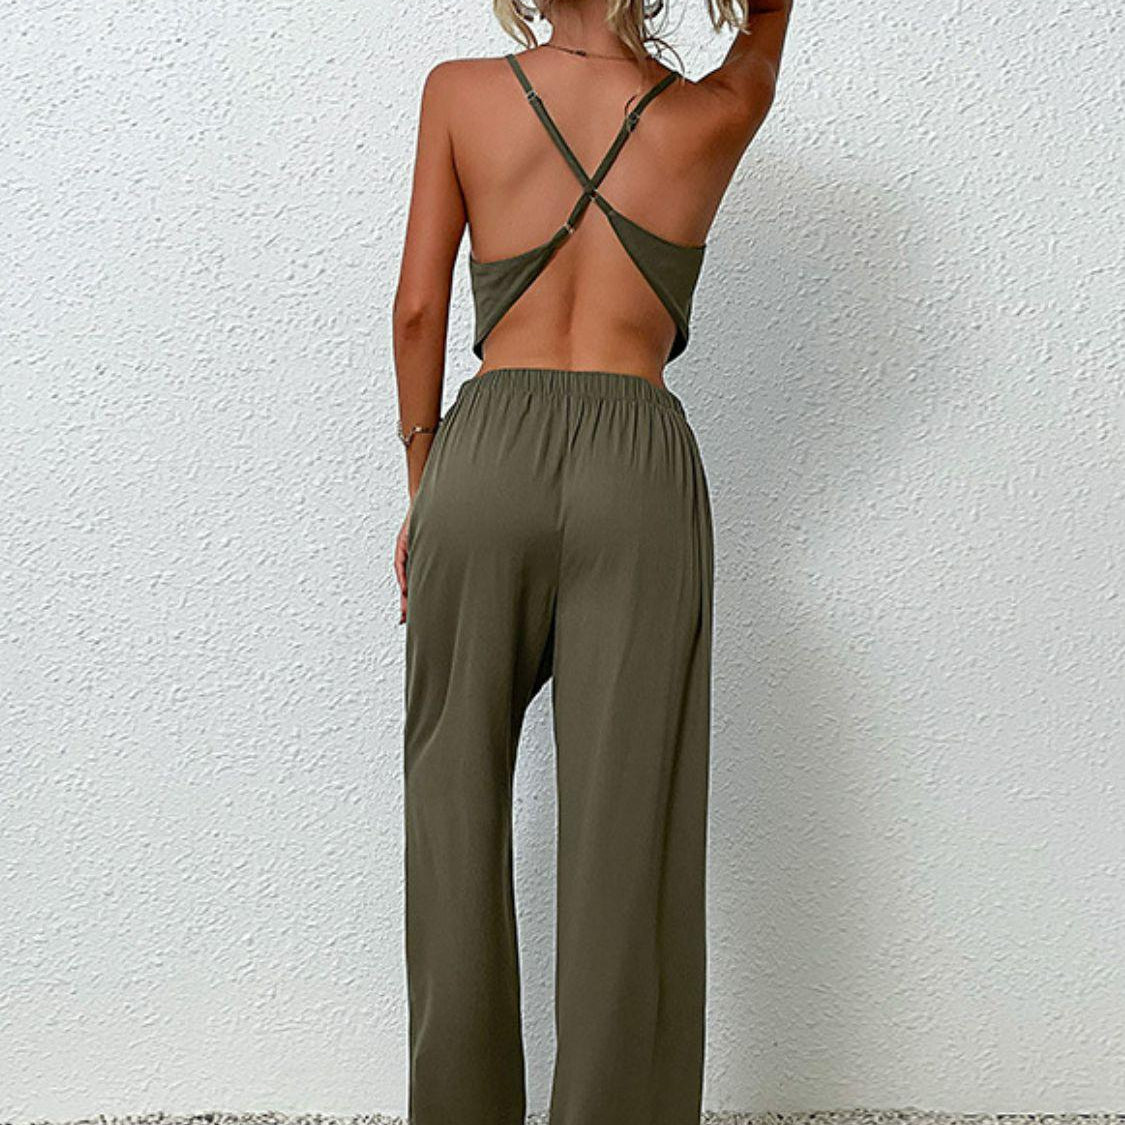 Women's Outfits & Sets Crisscross Back Cropped Top And Pants Set